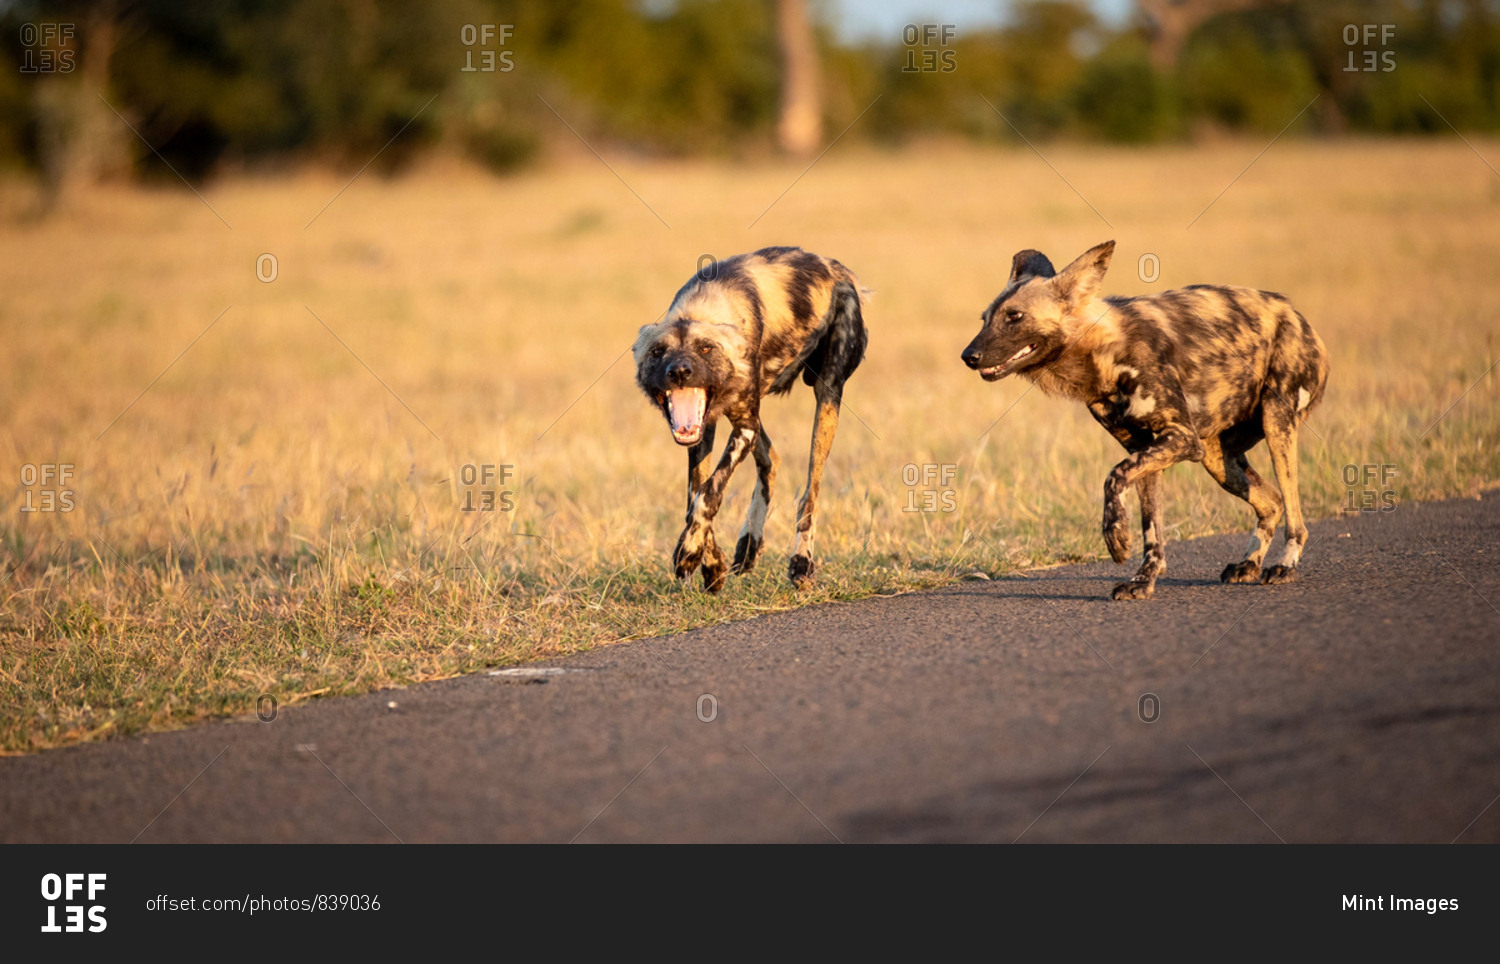 Two wild dog, Lycaon pictus, walk together, looking out of frame, mouth open, dry yellow grass background.